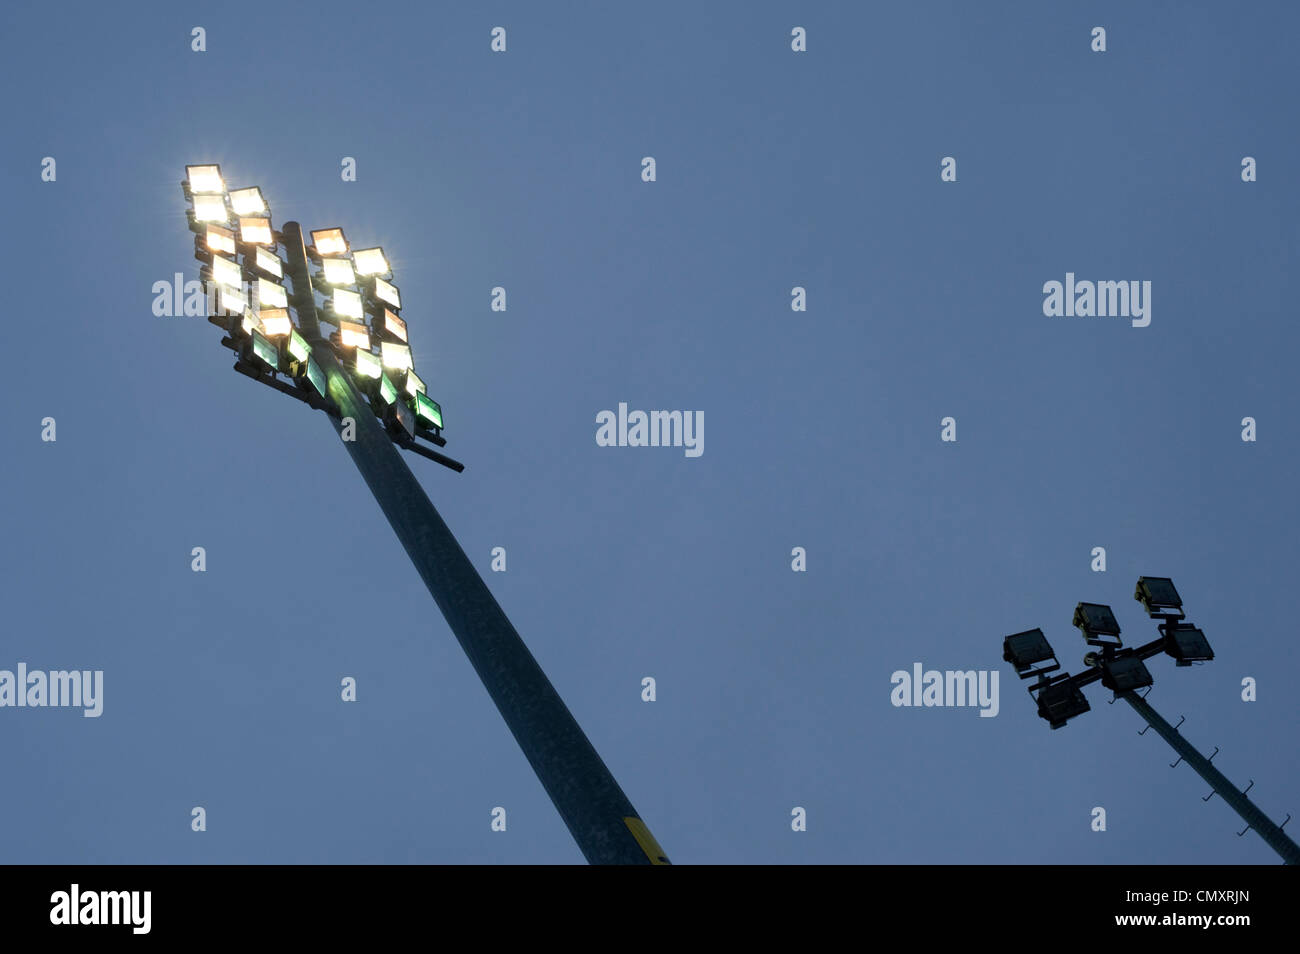 Floodlights at a football match at night in winter Stock Photo